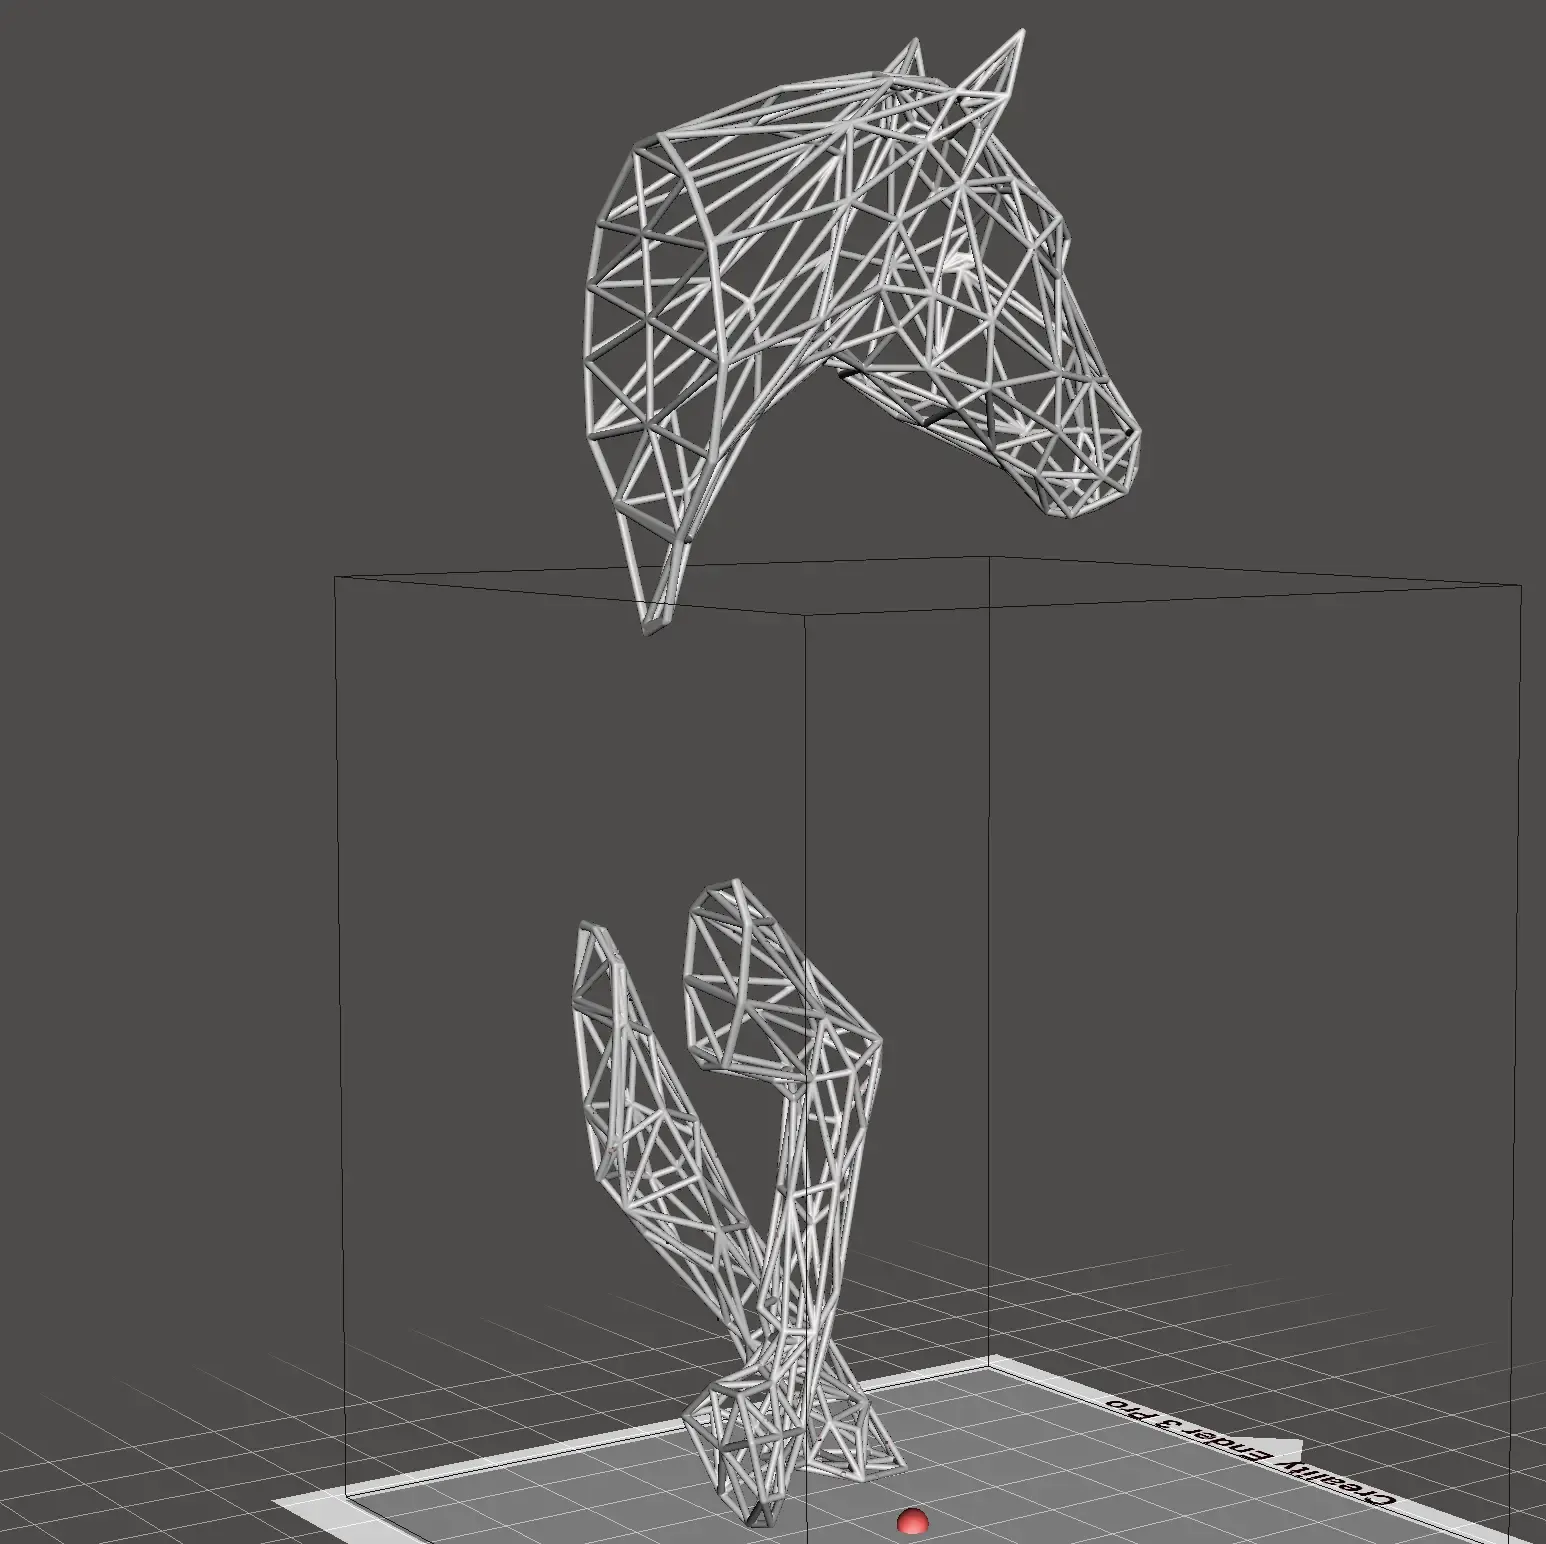 HORSE WIREFRAME WALL DECOR (2 DESIGNS)